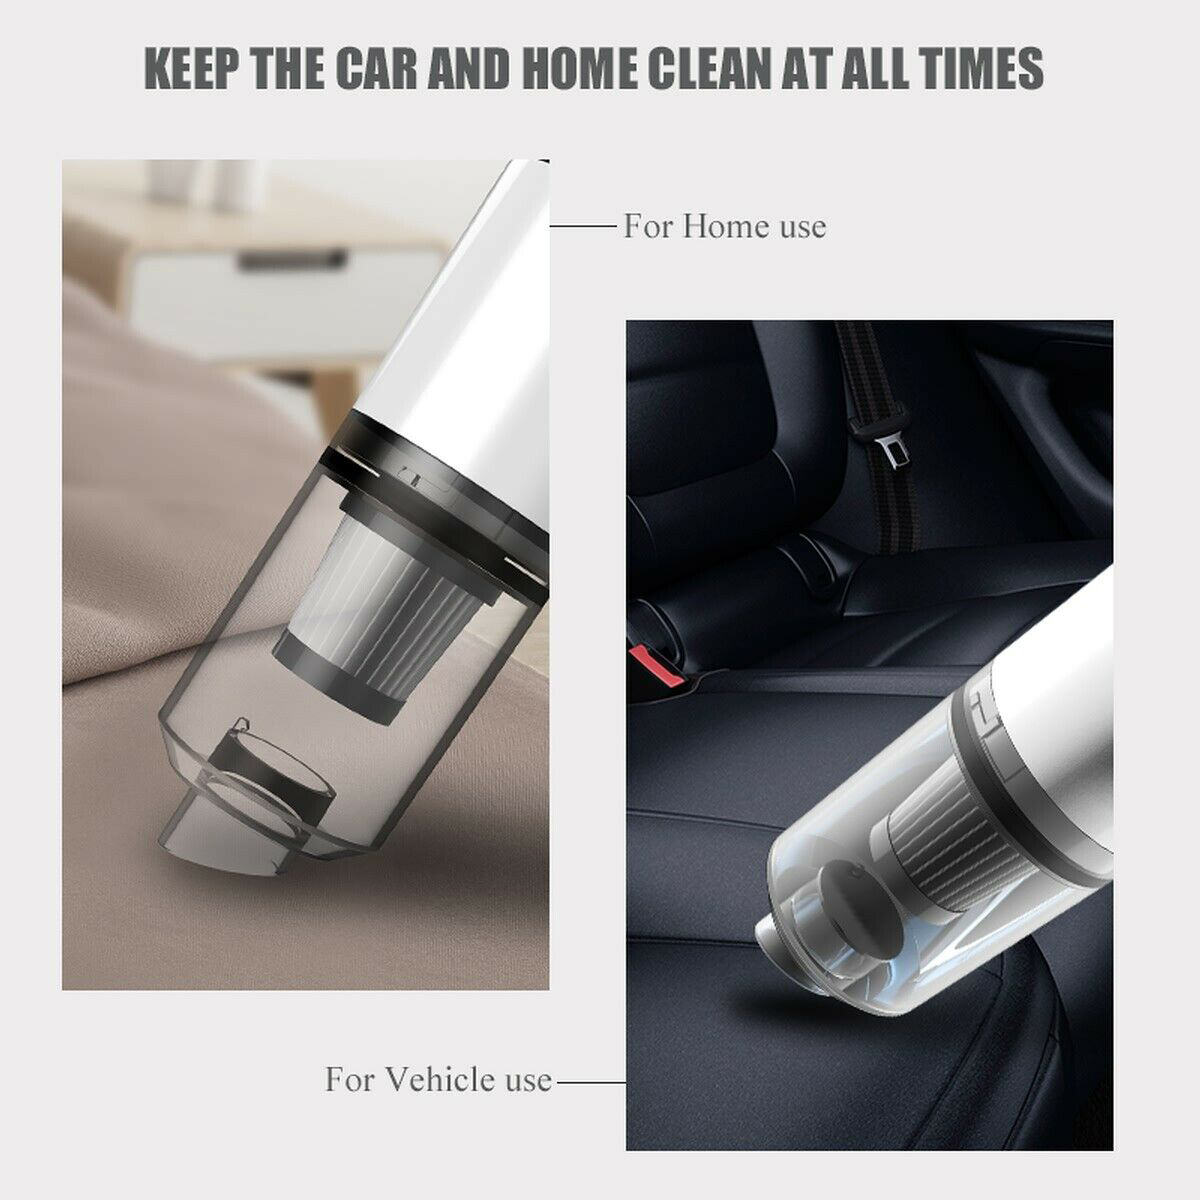 120W-Cordless-HandHeld-Vacuum-Cleaner-Mini-Portable-Dust-Cleaner-for-Car-Office-Home-8000Pa-1830652-10